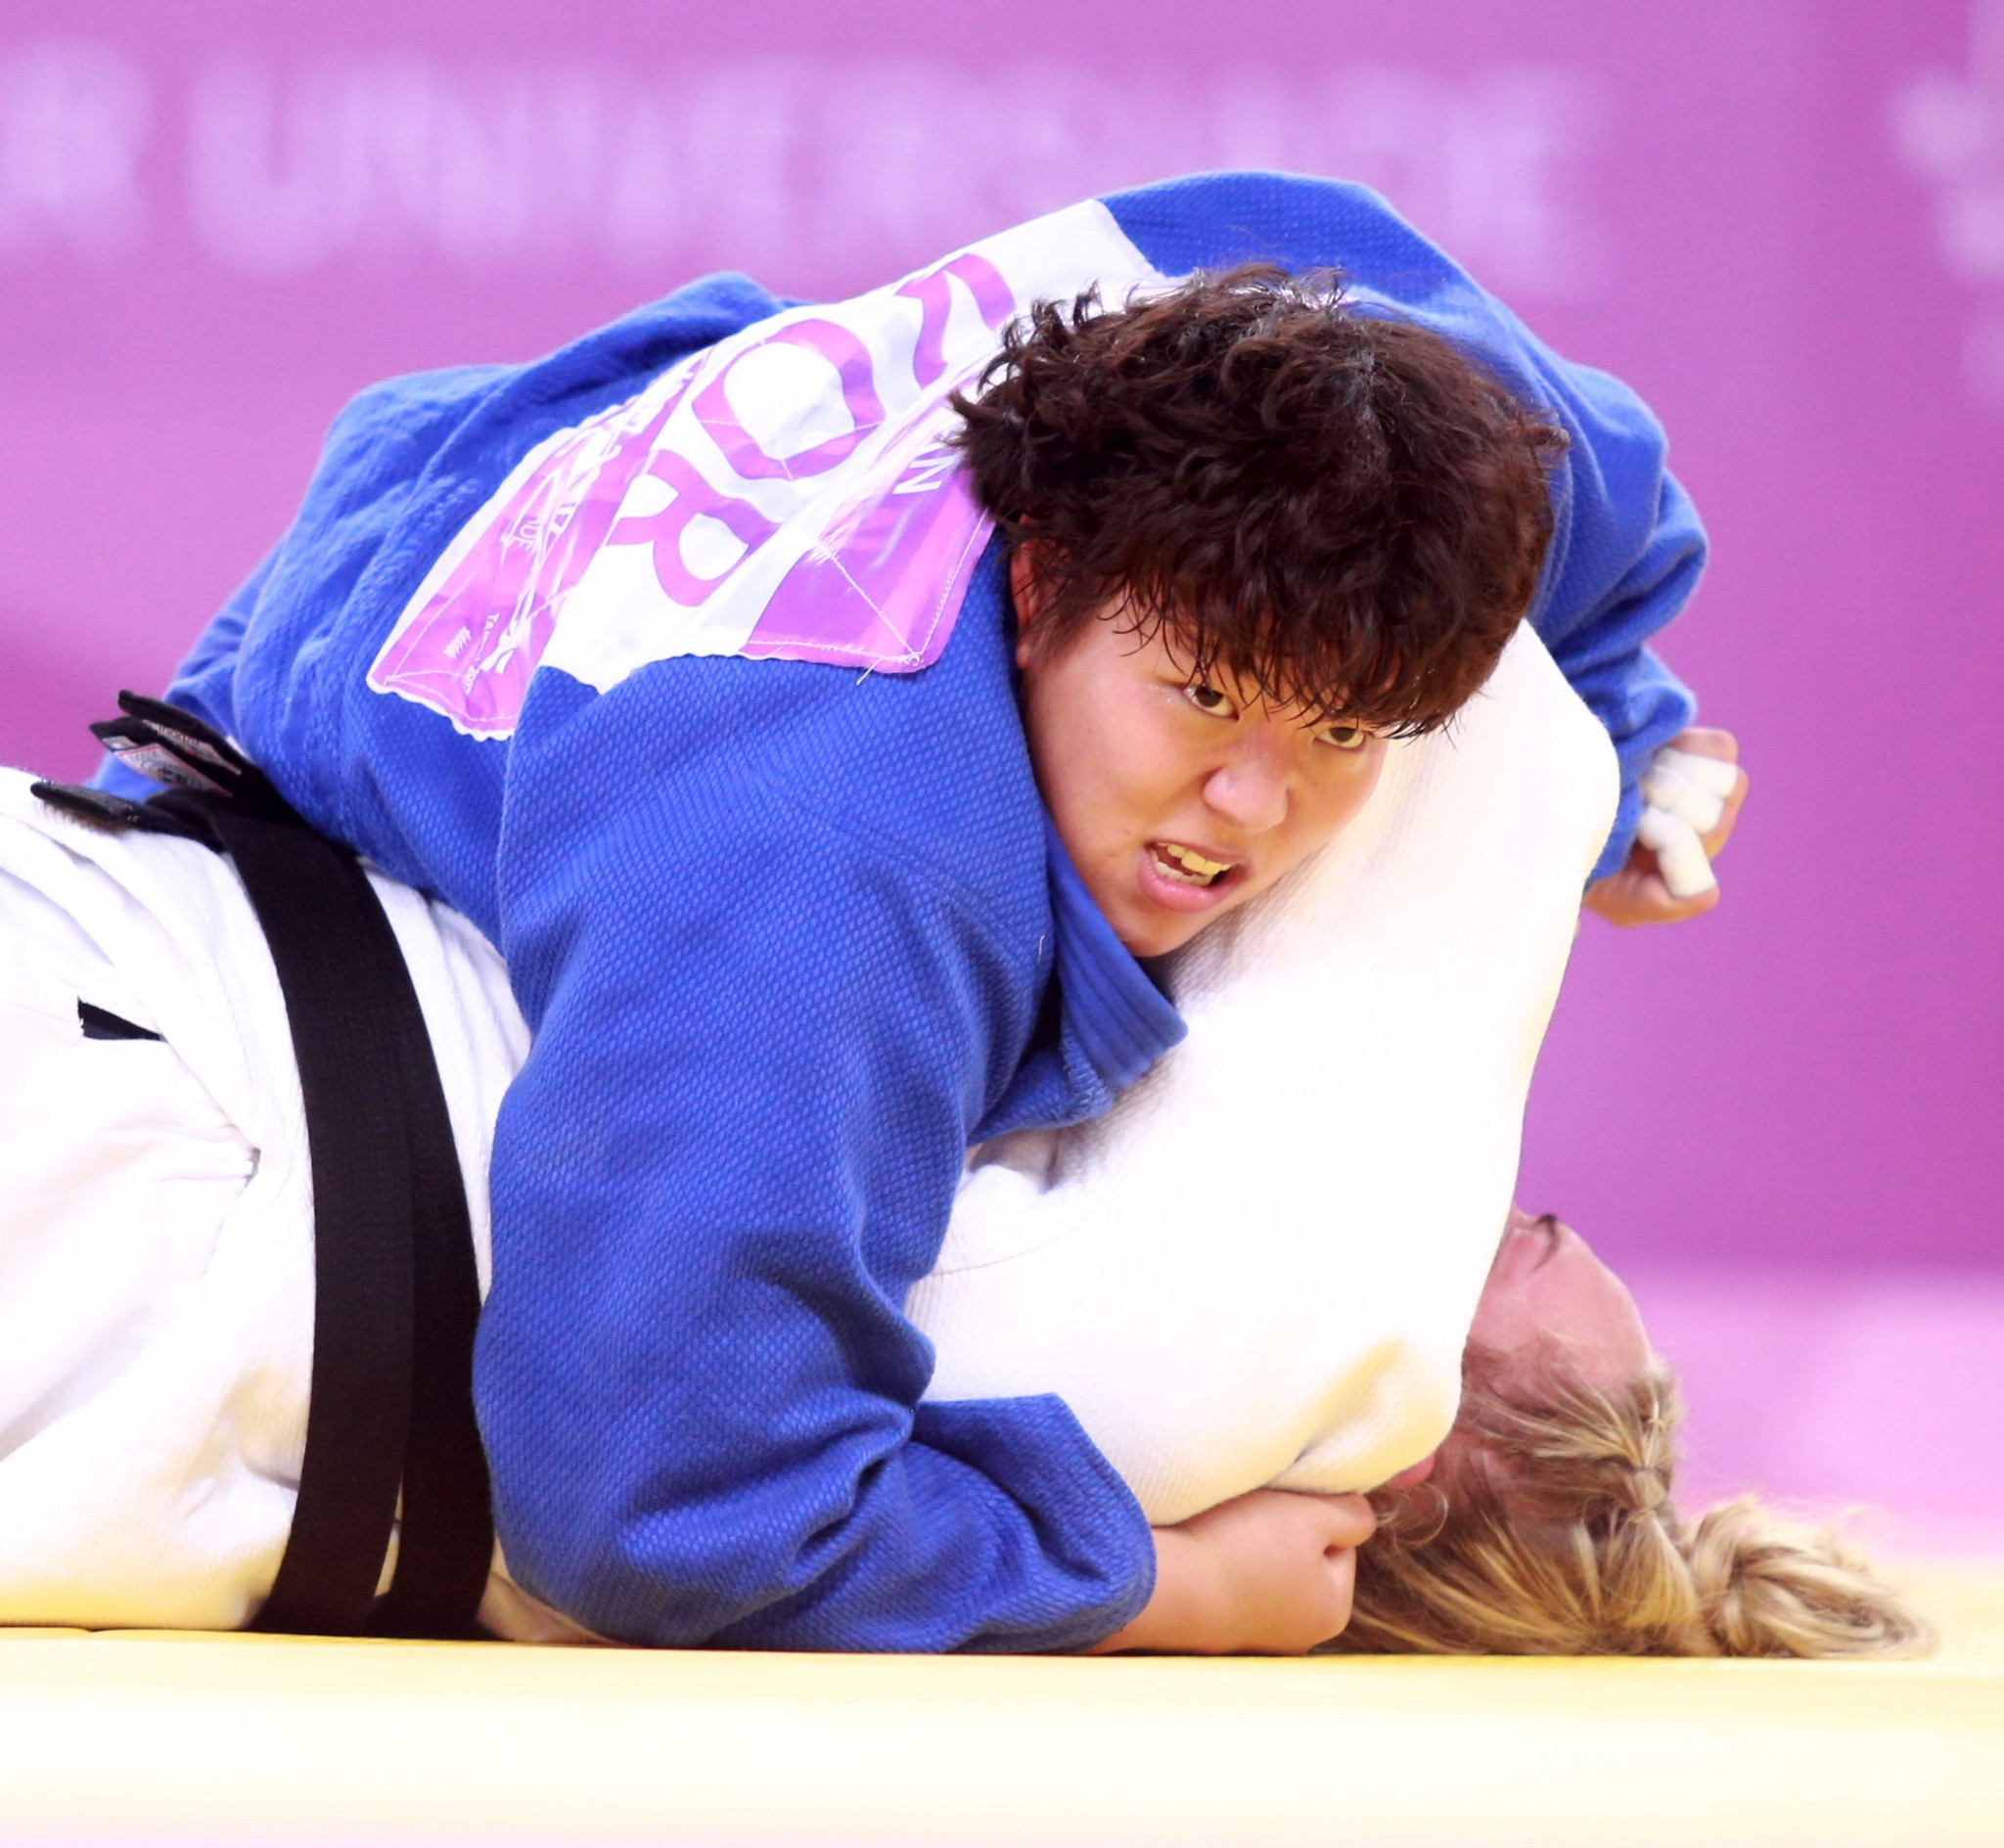 South Korea’s Han Mi-jin was the winner in the women’s over 100kg judo division ©Taipei 2017